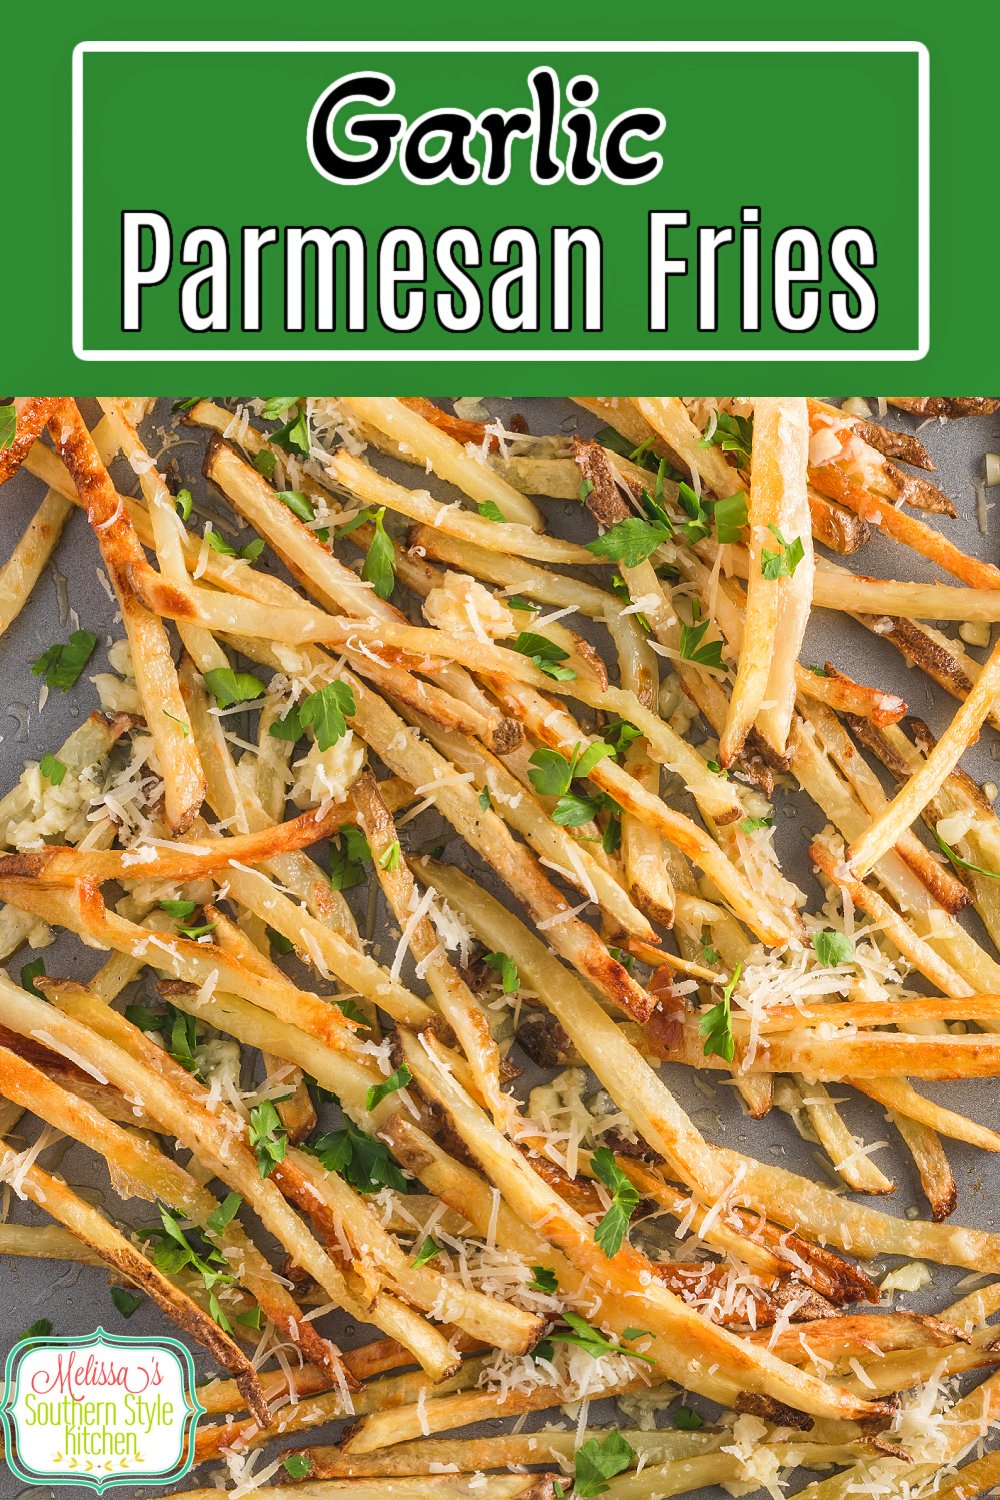 Make these crispy Garlic Parmesan Fries on a sheet pan in the oven #frenchfries #ovenfried #ovenfries #potatorecipes #easyfrenchfries #frenchfriesrecipe #garlicbutter #garlicparmesanfries